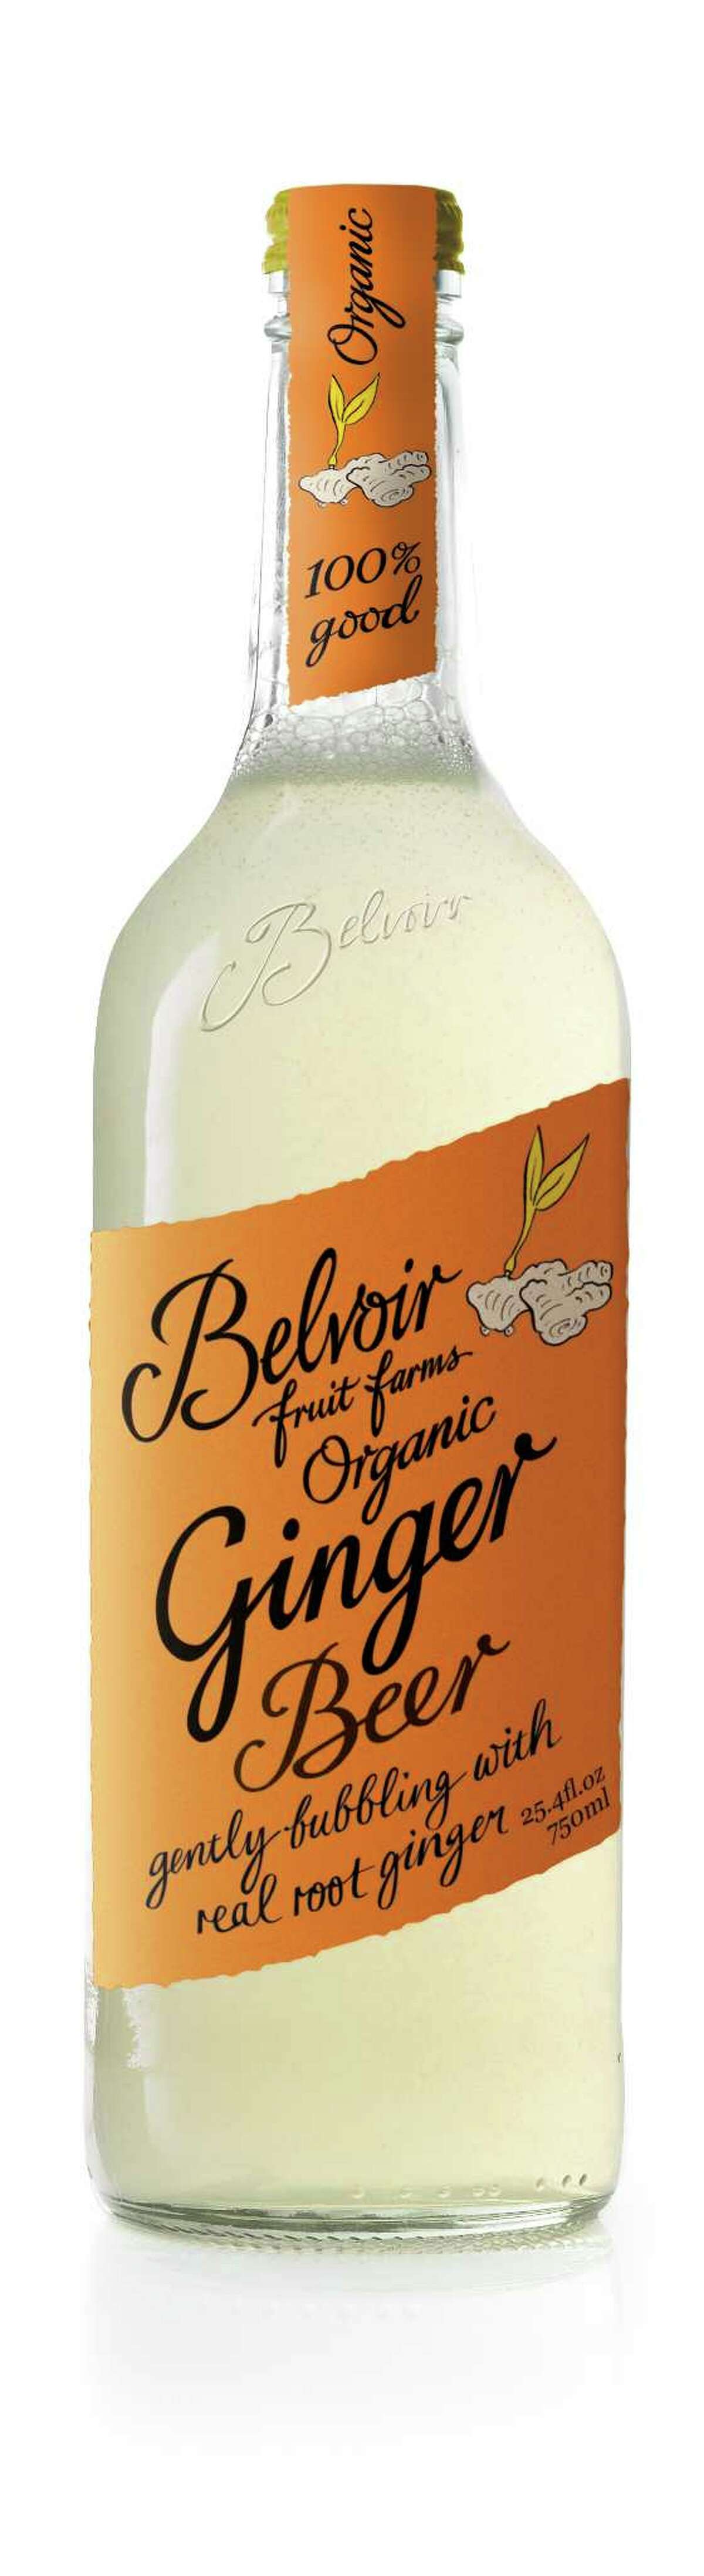 Belvoir Ginger Beer is made with fresh elderflower and ginger, and makes a mean Moscow Mule cocktail.